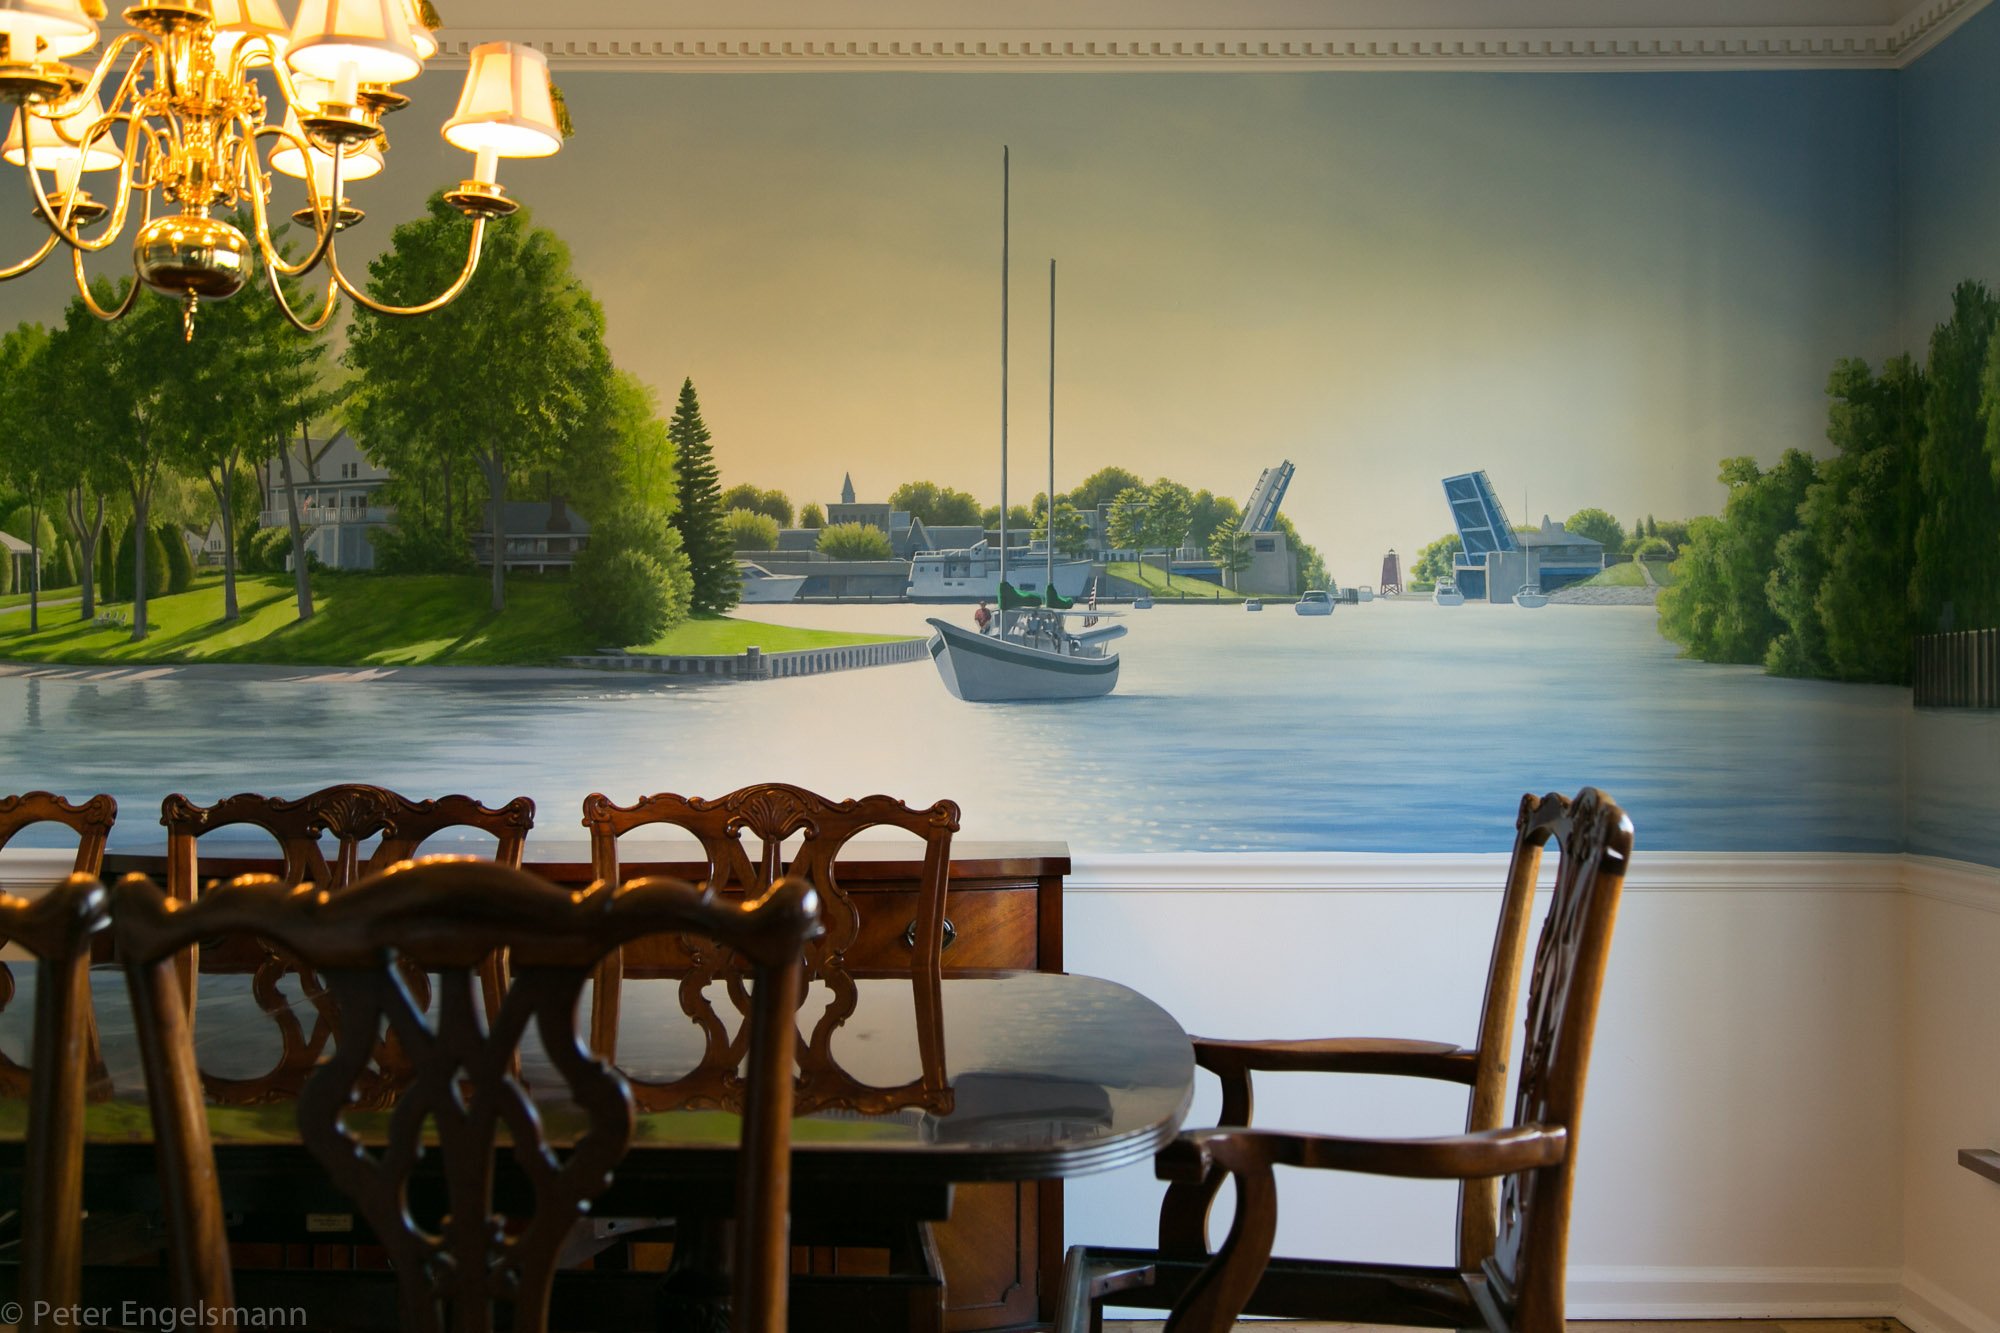  Northern Michigan Mural (Charlevoix, Harbor Springs), acrylic on wallboard, private residence. © Peter K. Engelsmann 